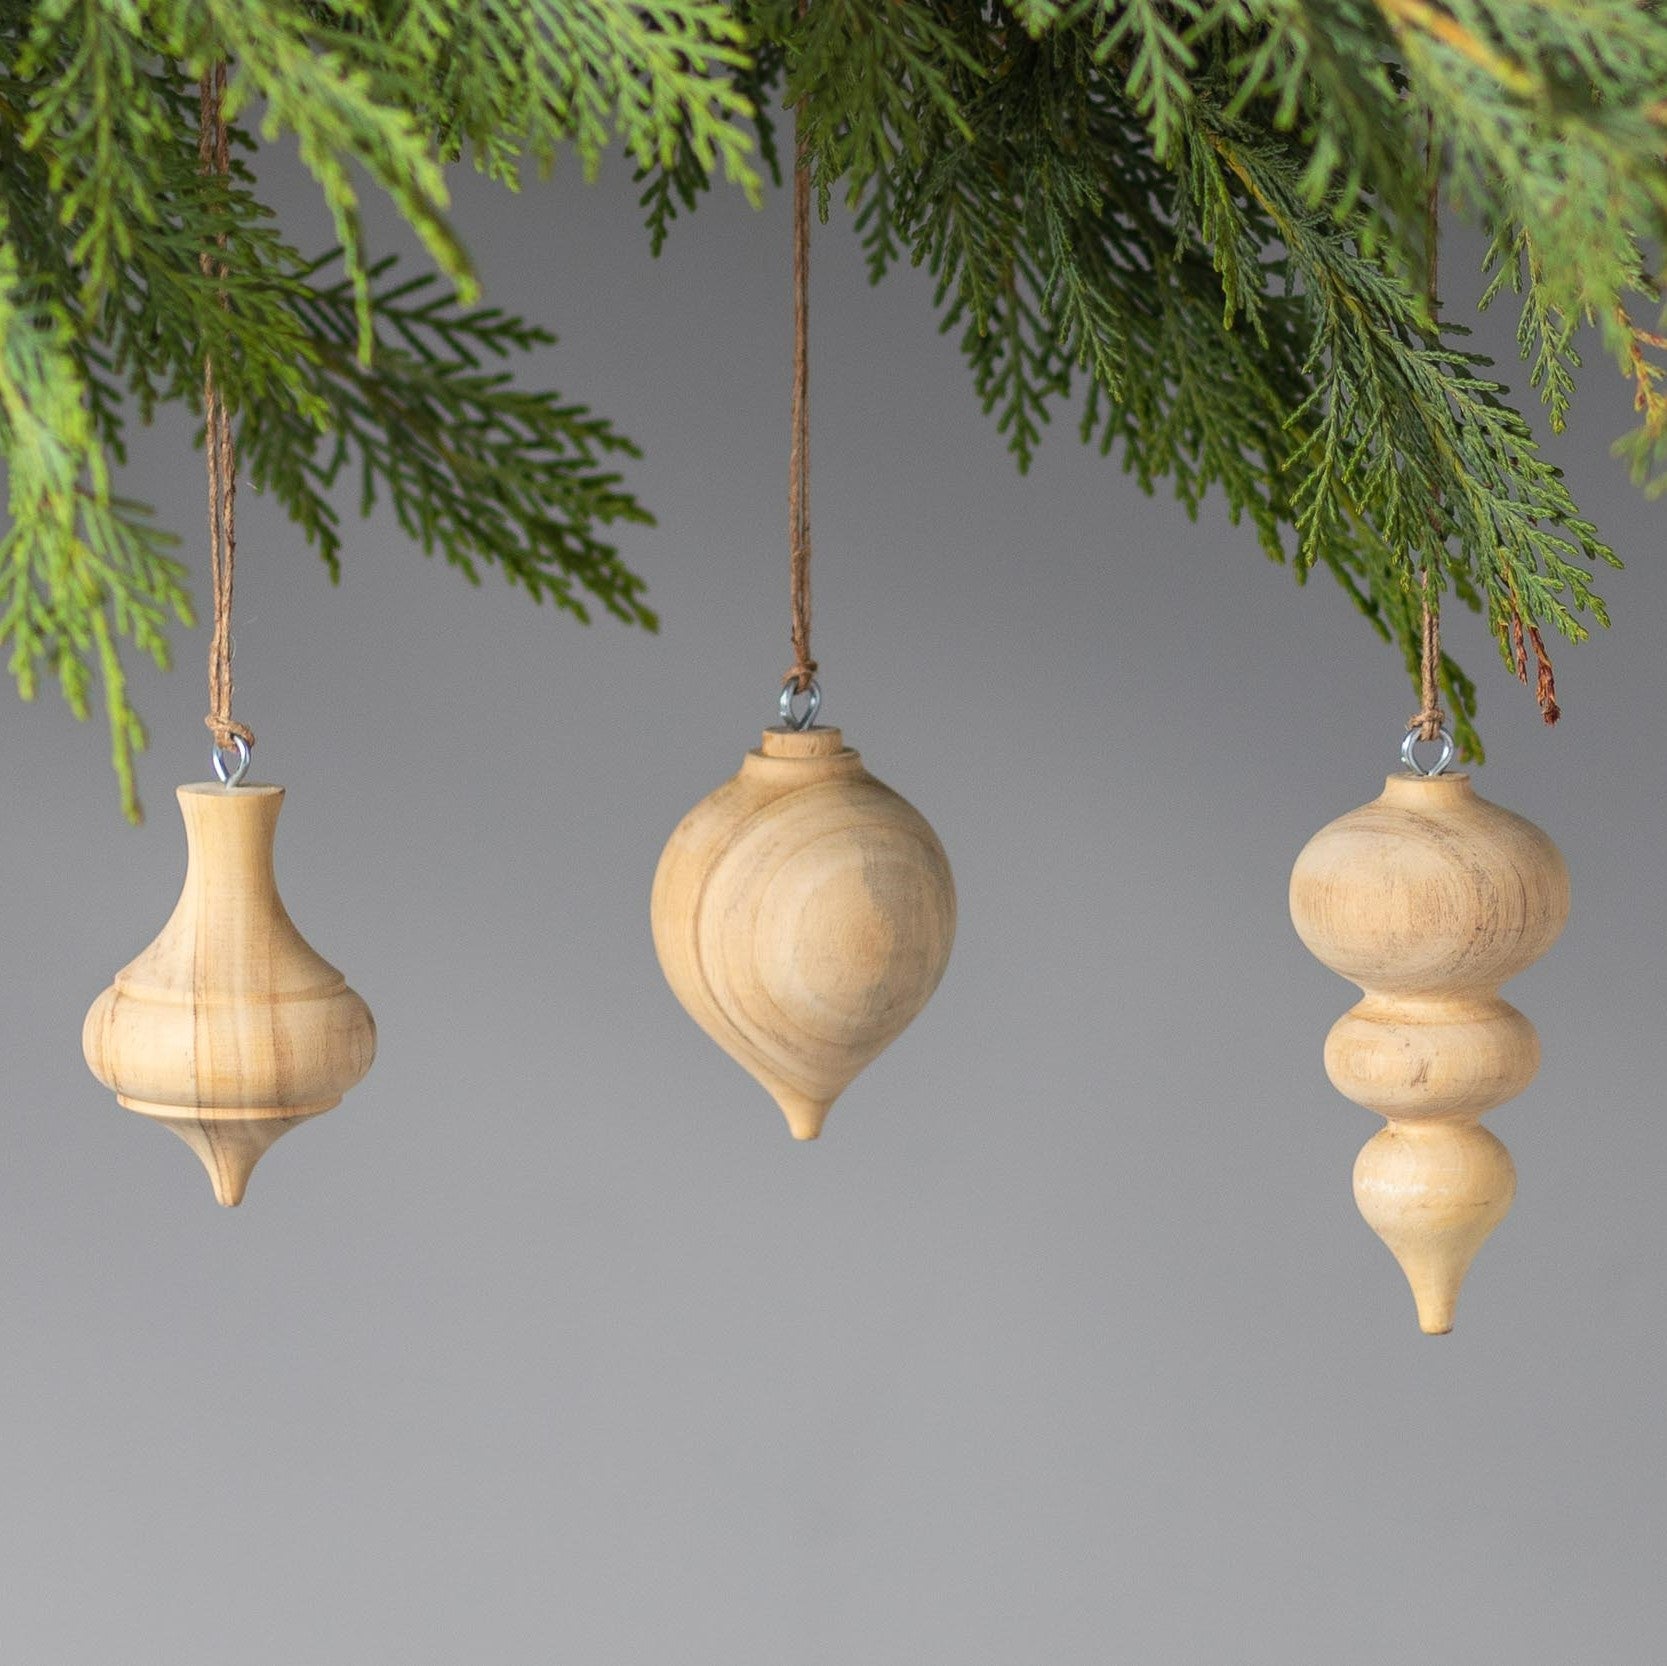 Pine Round Drop Spindle Ornament